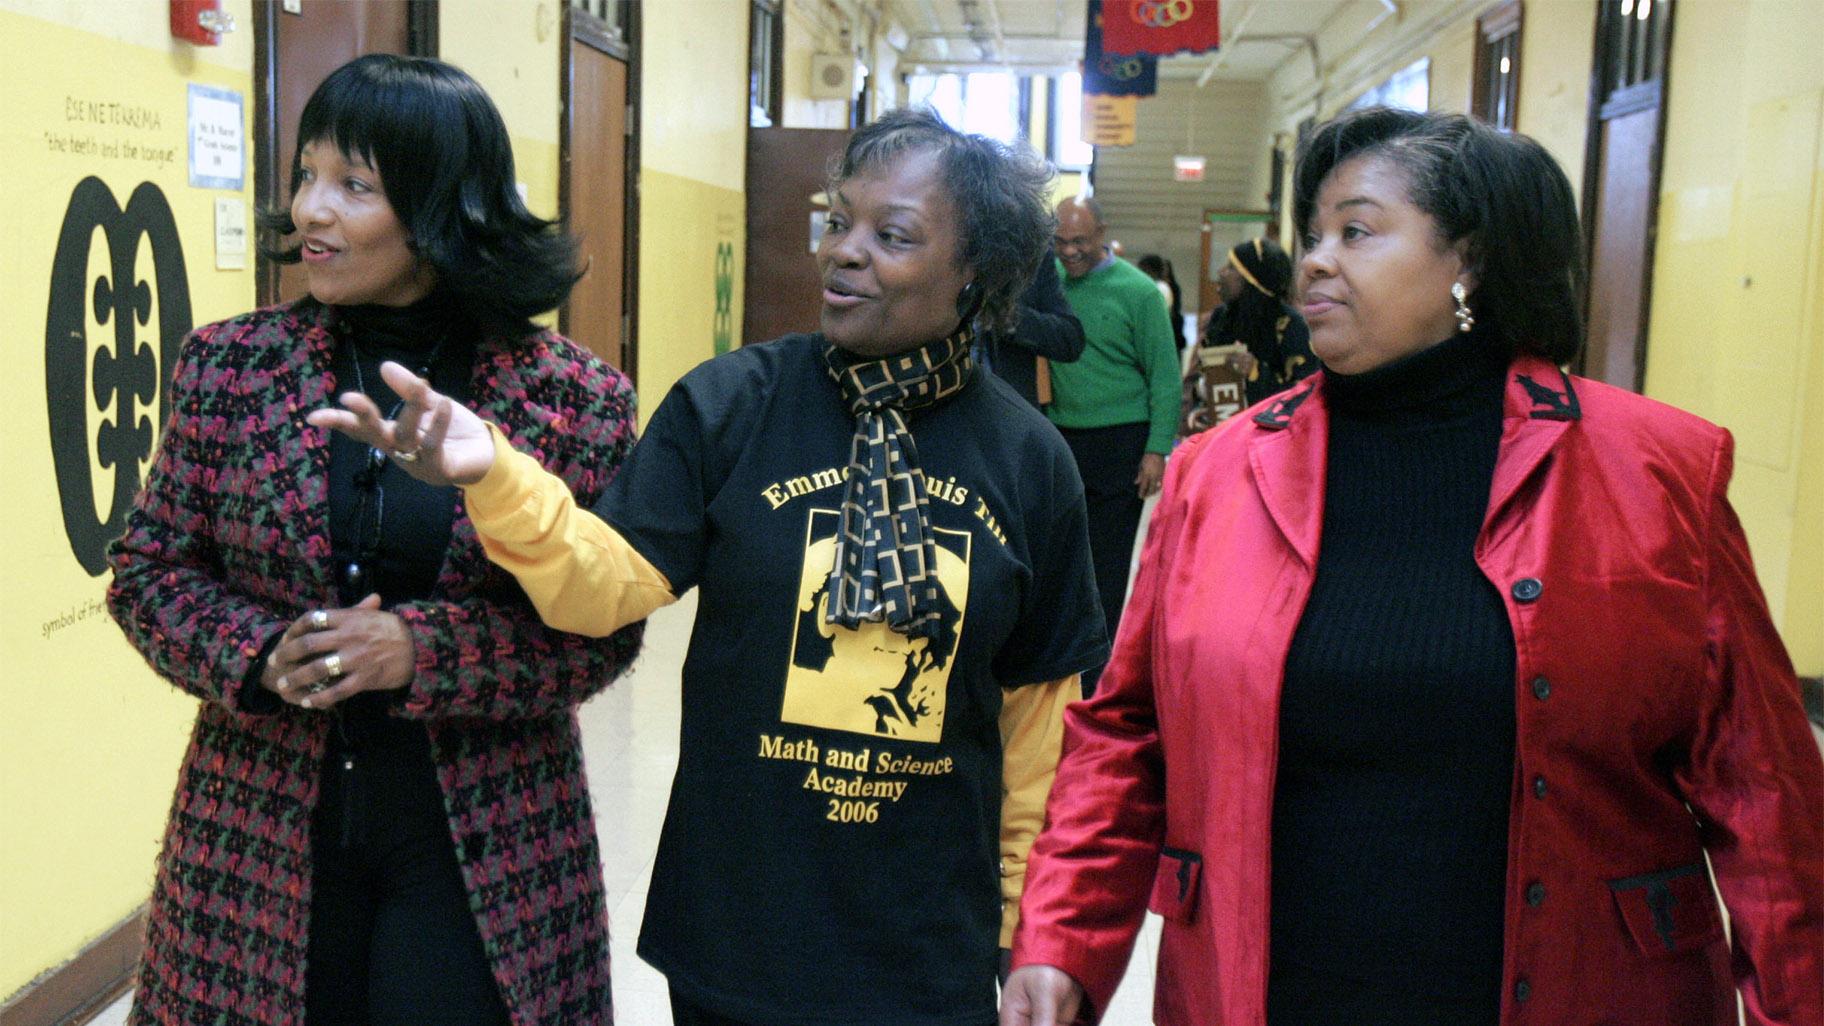 In this Feb 24, 2006, file photo, Deborah Watts, left, and Ollie Gordon, right, both cousins of Emmett Till, accompany Principal Mary Rogers as they walk through a hallway at Emmett Louis Till Math & Science Academy, in Chicago, honoring the 14-year-old former student. Till's lynching galvanized the civil rights movement. (AP Photo / M. Spencer Green, File)